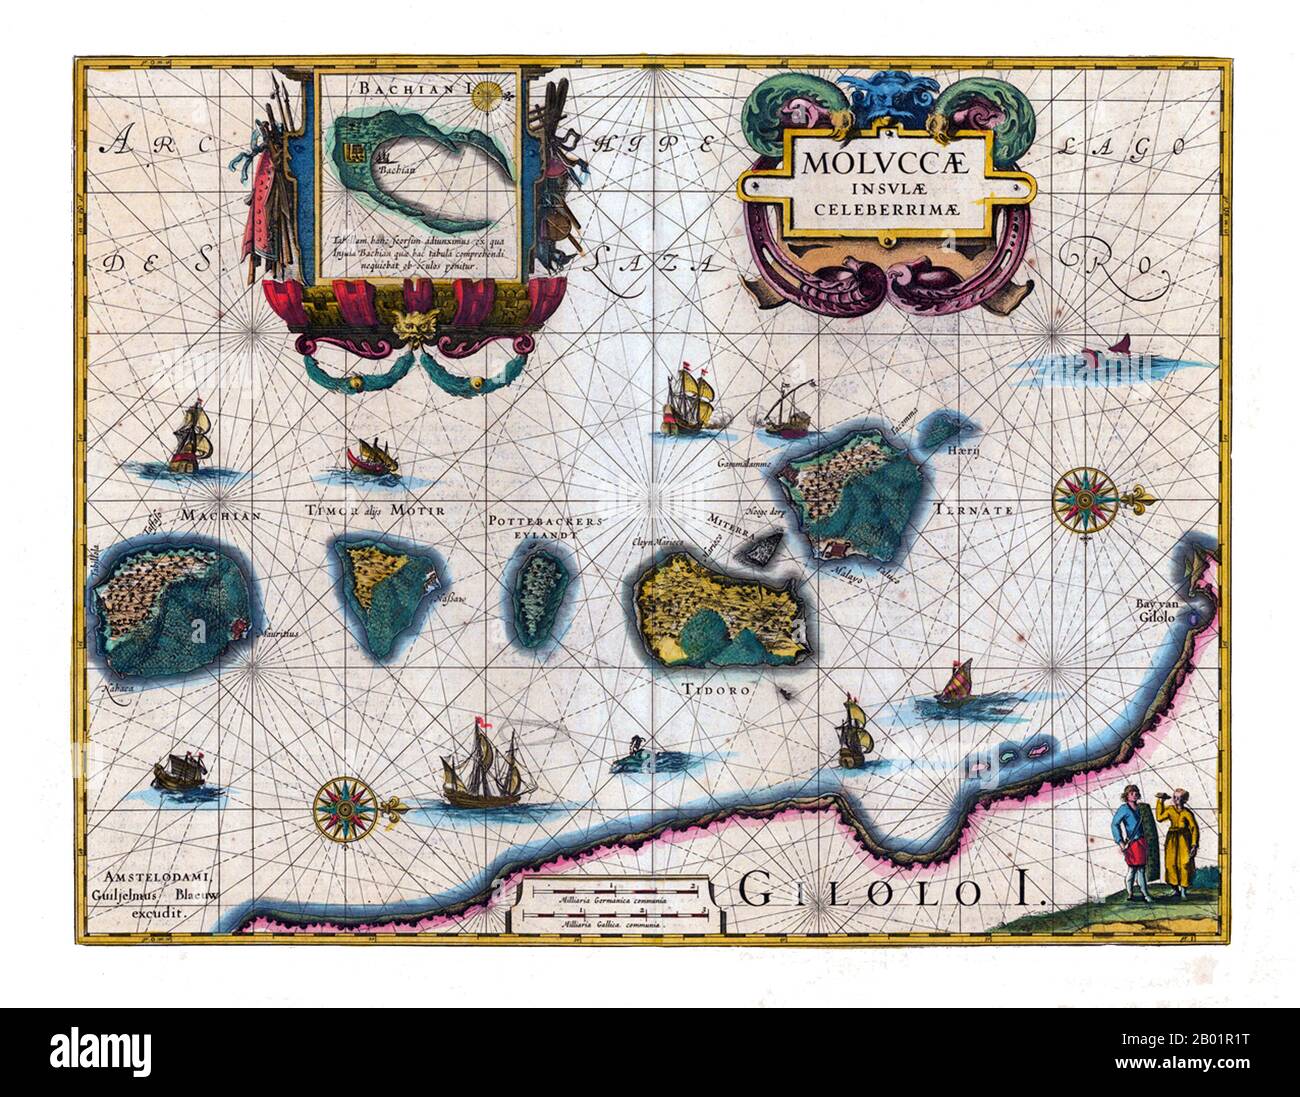 Indonesia/Netherlands: Probably the first published map of the Maluku Islands. Copper engraving by Jodocus Hondius (17 October 1563 - 12 February 1612) and found in 'Atlas Appendix' by Willem Blaeu (1571 -21 October 1638), 1630.  The Maluku Islands (also known as the Moluccas, Moluccan Islands and the Spice Islands) are an archipelago that is part of Indonesia, and part of the larger Maritime Southeast Asia region. Tectonically they are located on the Halmahera Plate within the Molucca Sea Collision Zone. Geographically they are located east of Sulawesi (Celebes) and west of New Guinea. Stock Photo